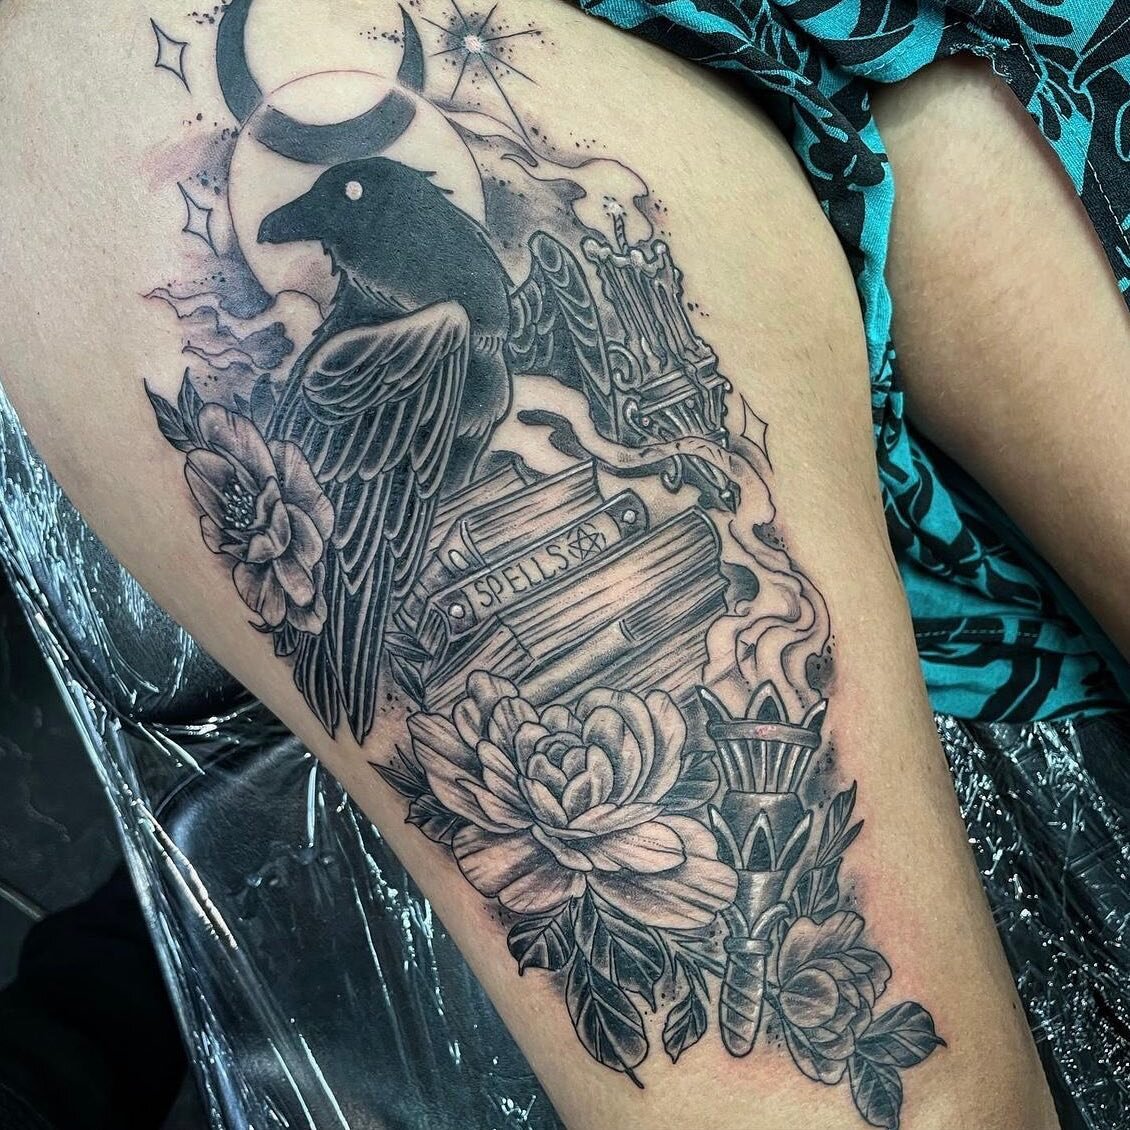 Magical, witchy, fantasy theme tattoo by Mike ☺️